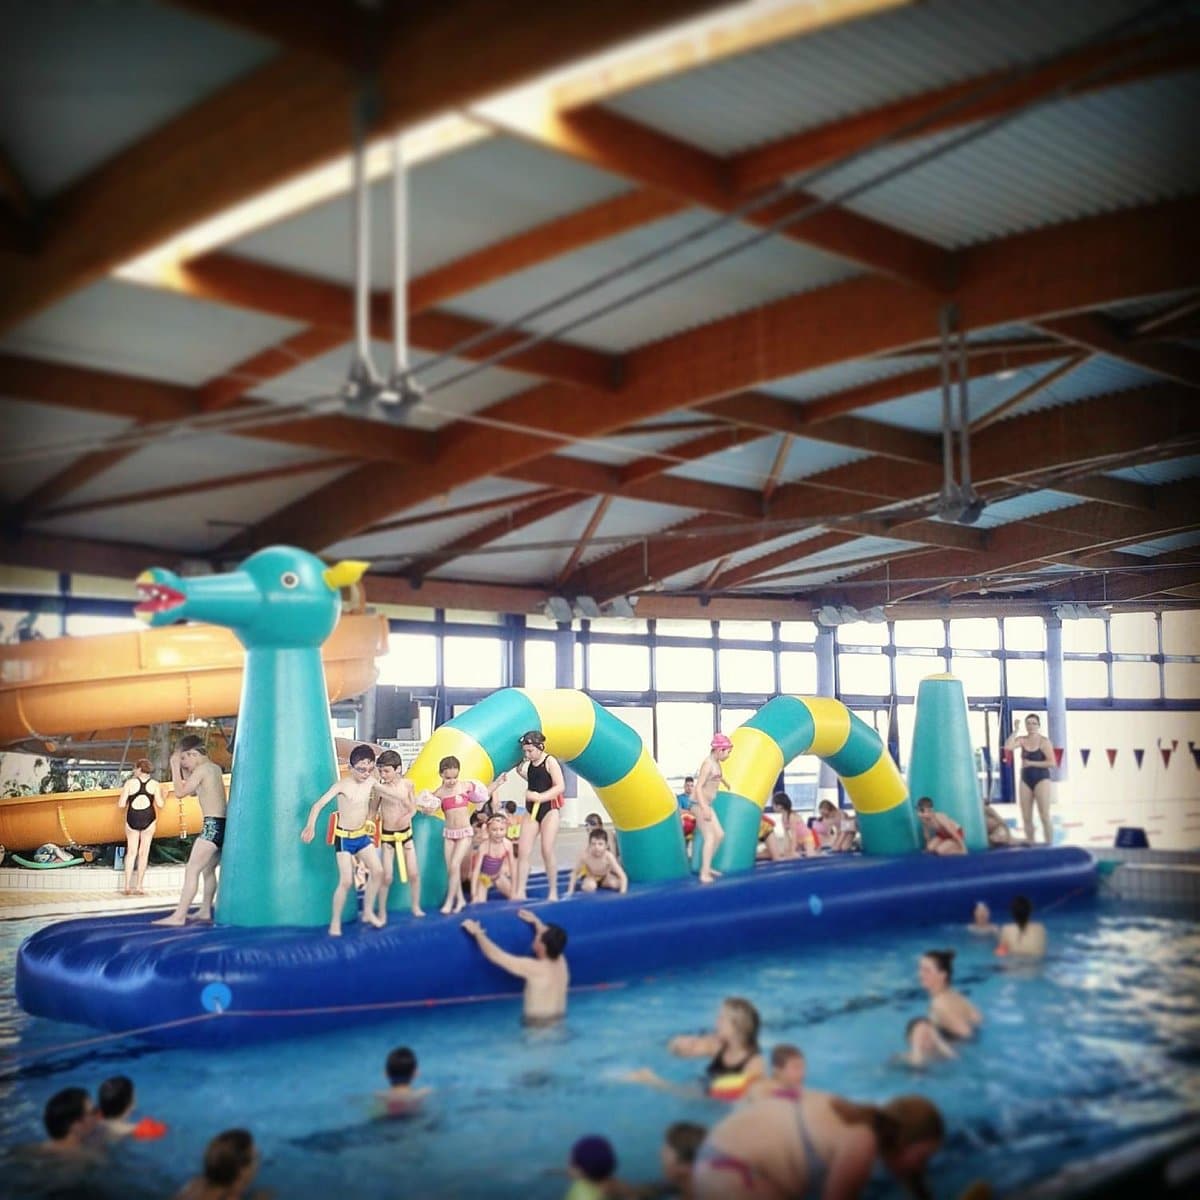 Water fun with an inflatable structure in the Espace Nautique de la Grande Garenne pool.